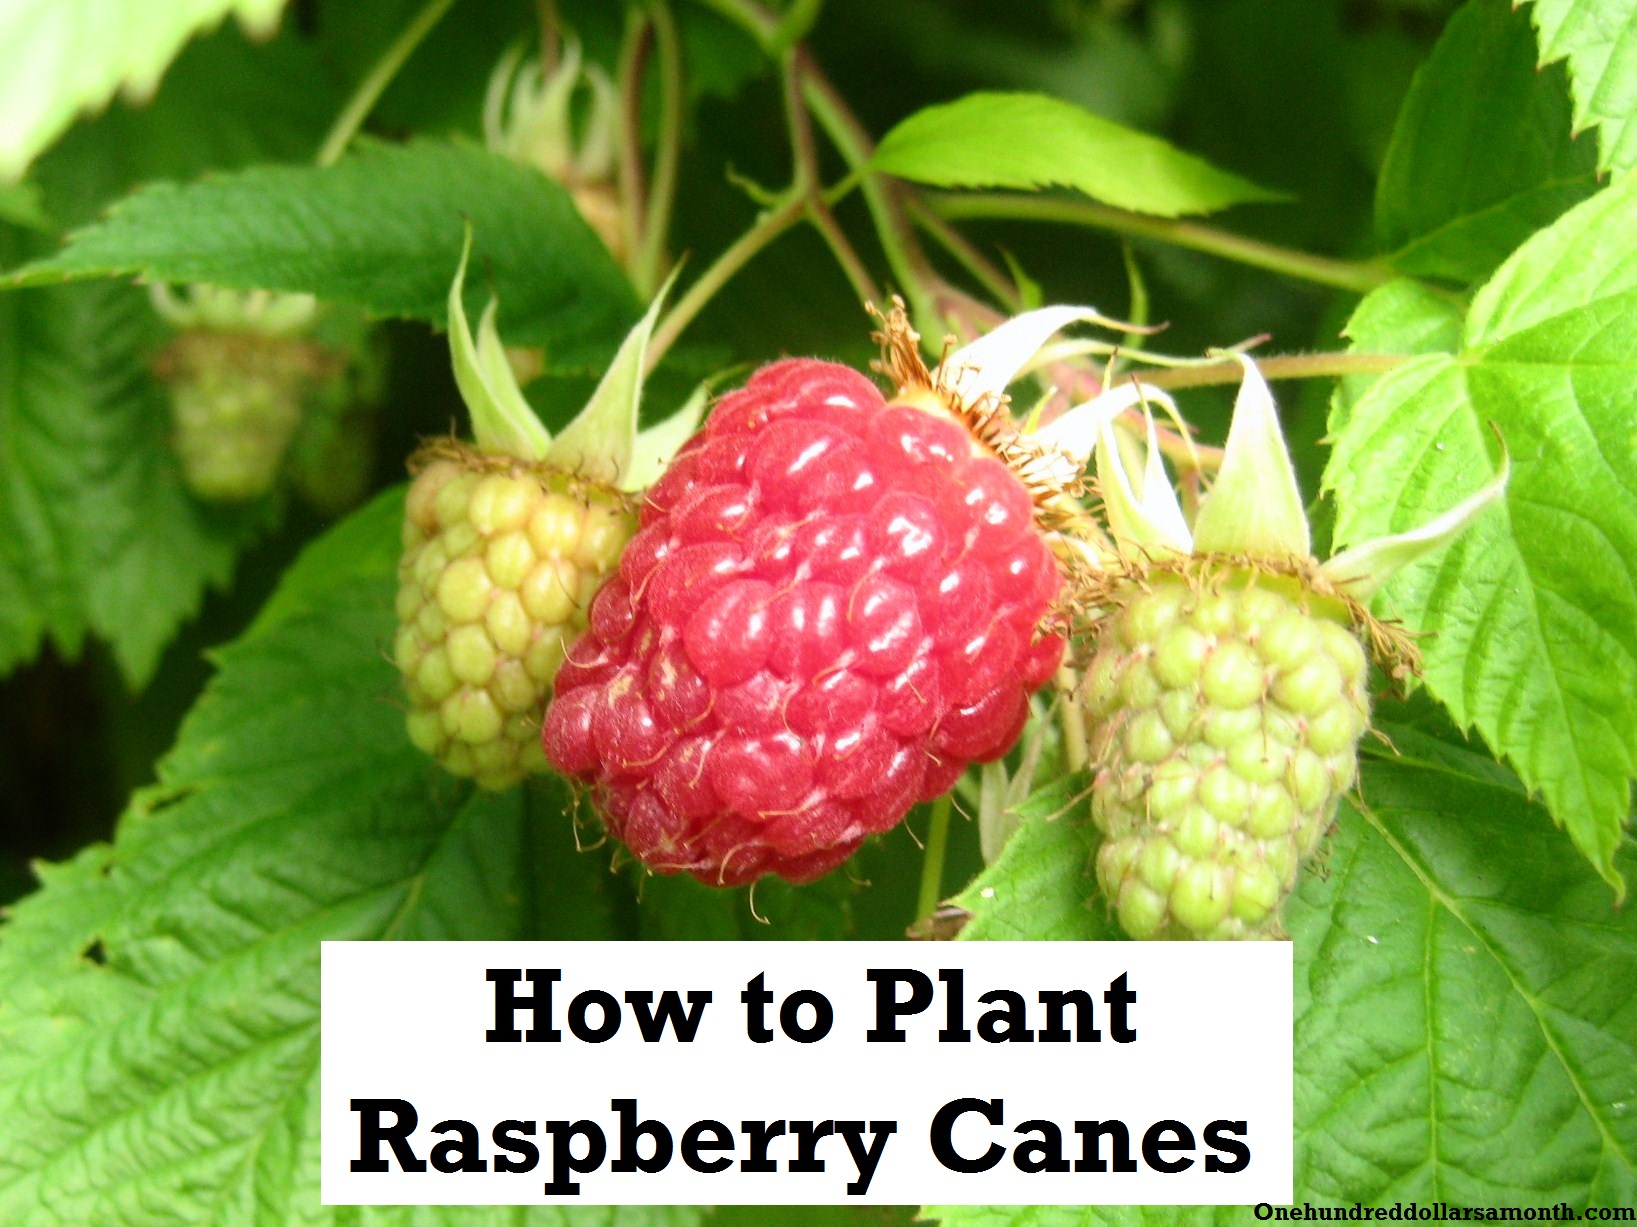 How to Grow Your Own Food: How to Plant Raspberries / Raspberry Canes